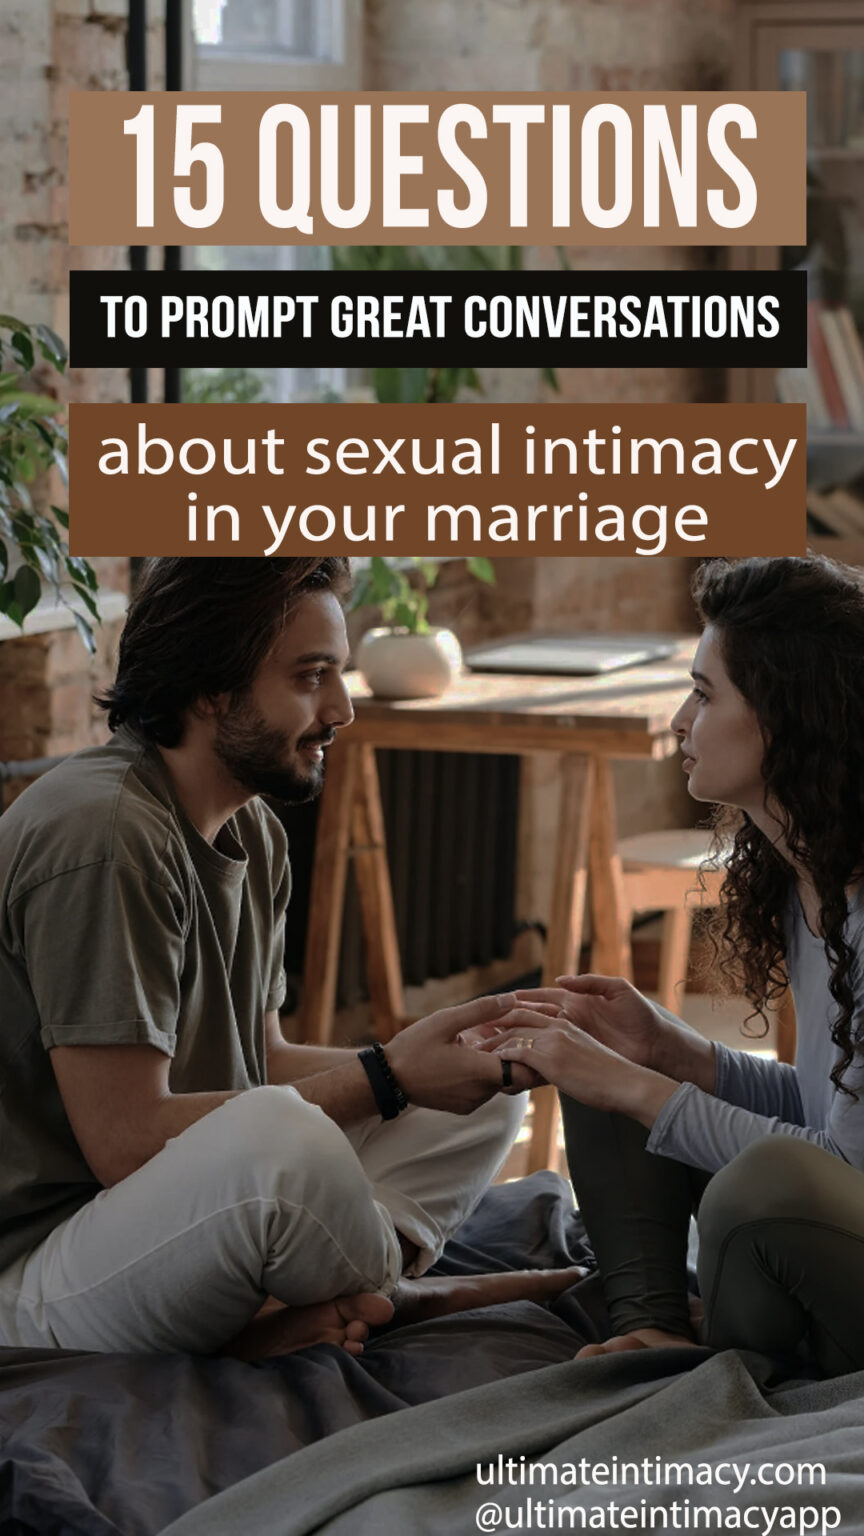 15 Questions To Prompt Great Conversations About Sexual Intimacy